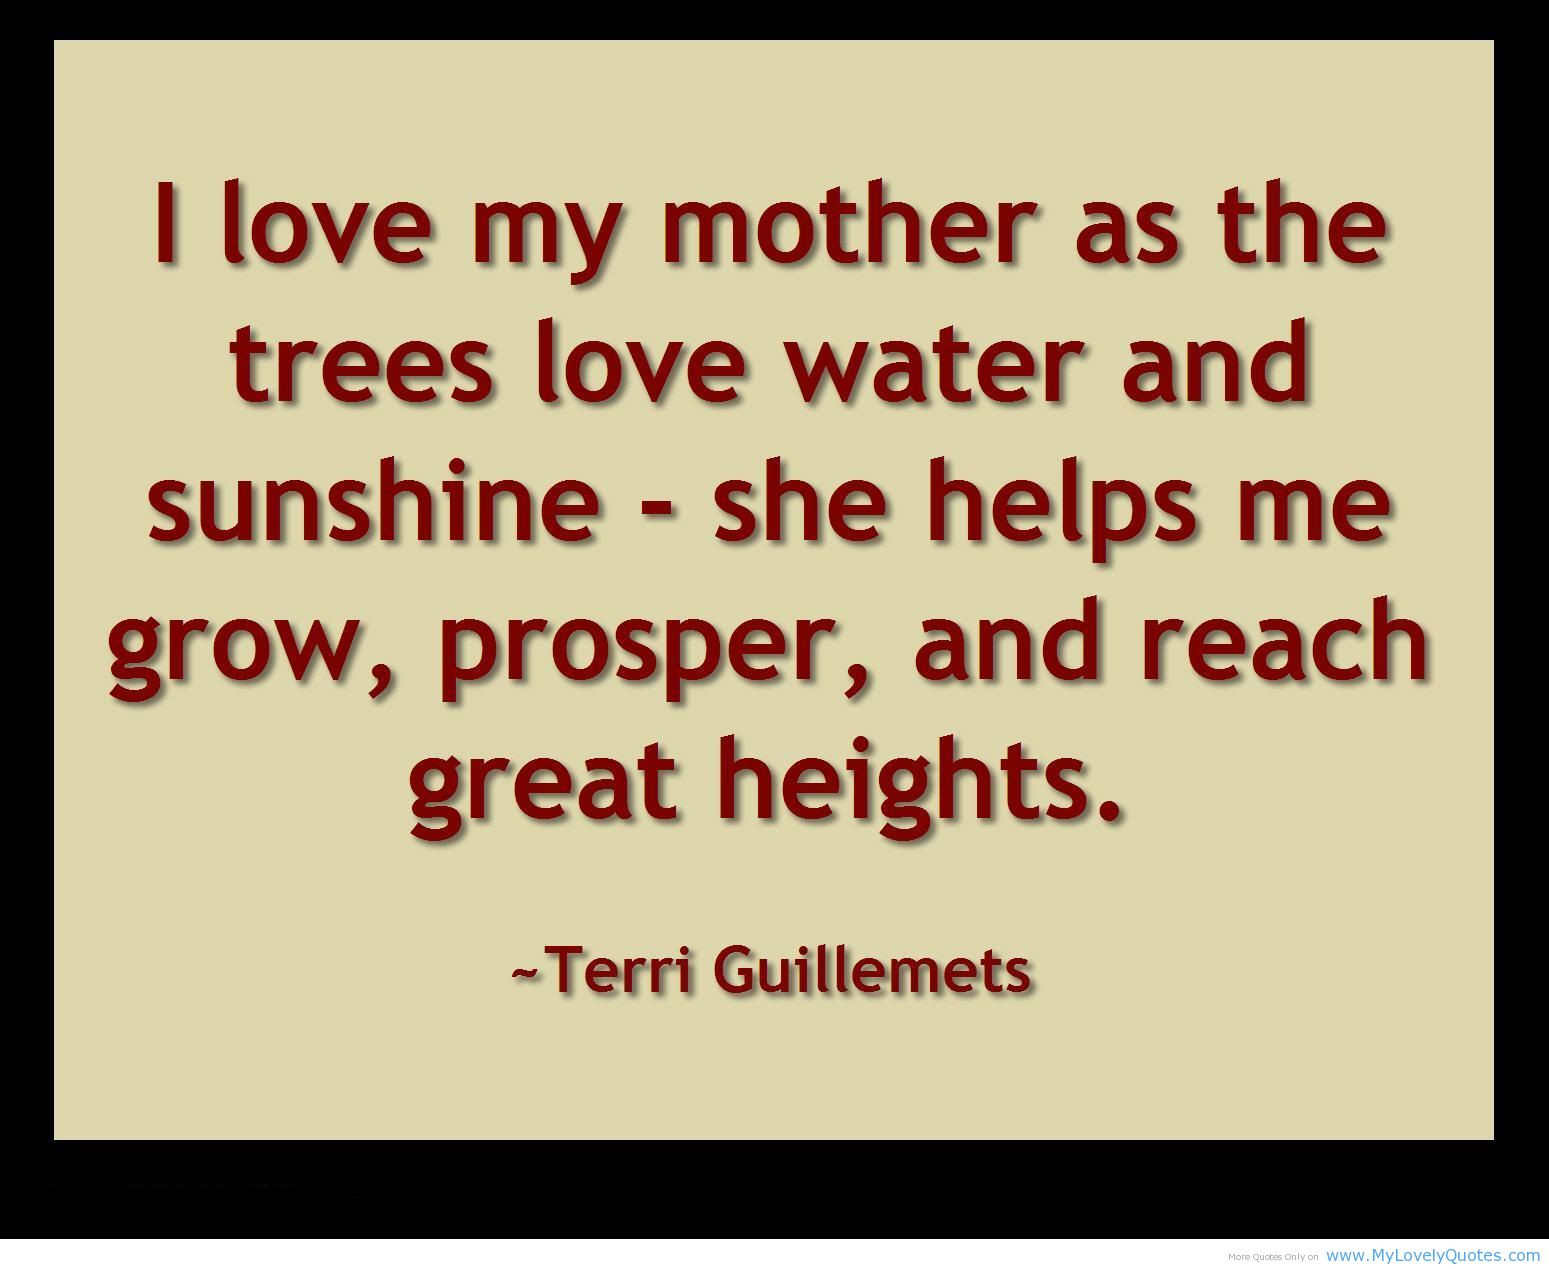 Quotes On Mother
 Quotes About Mothers Love QuotesGram